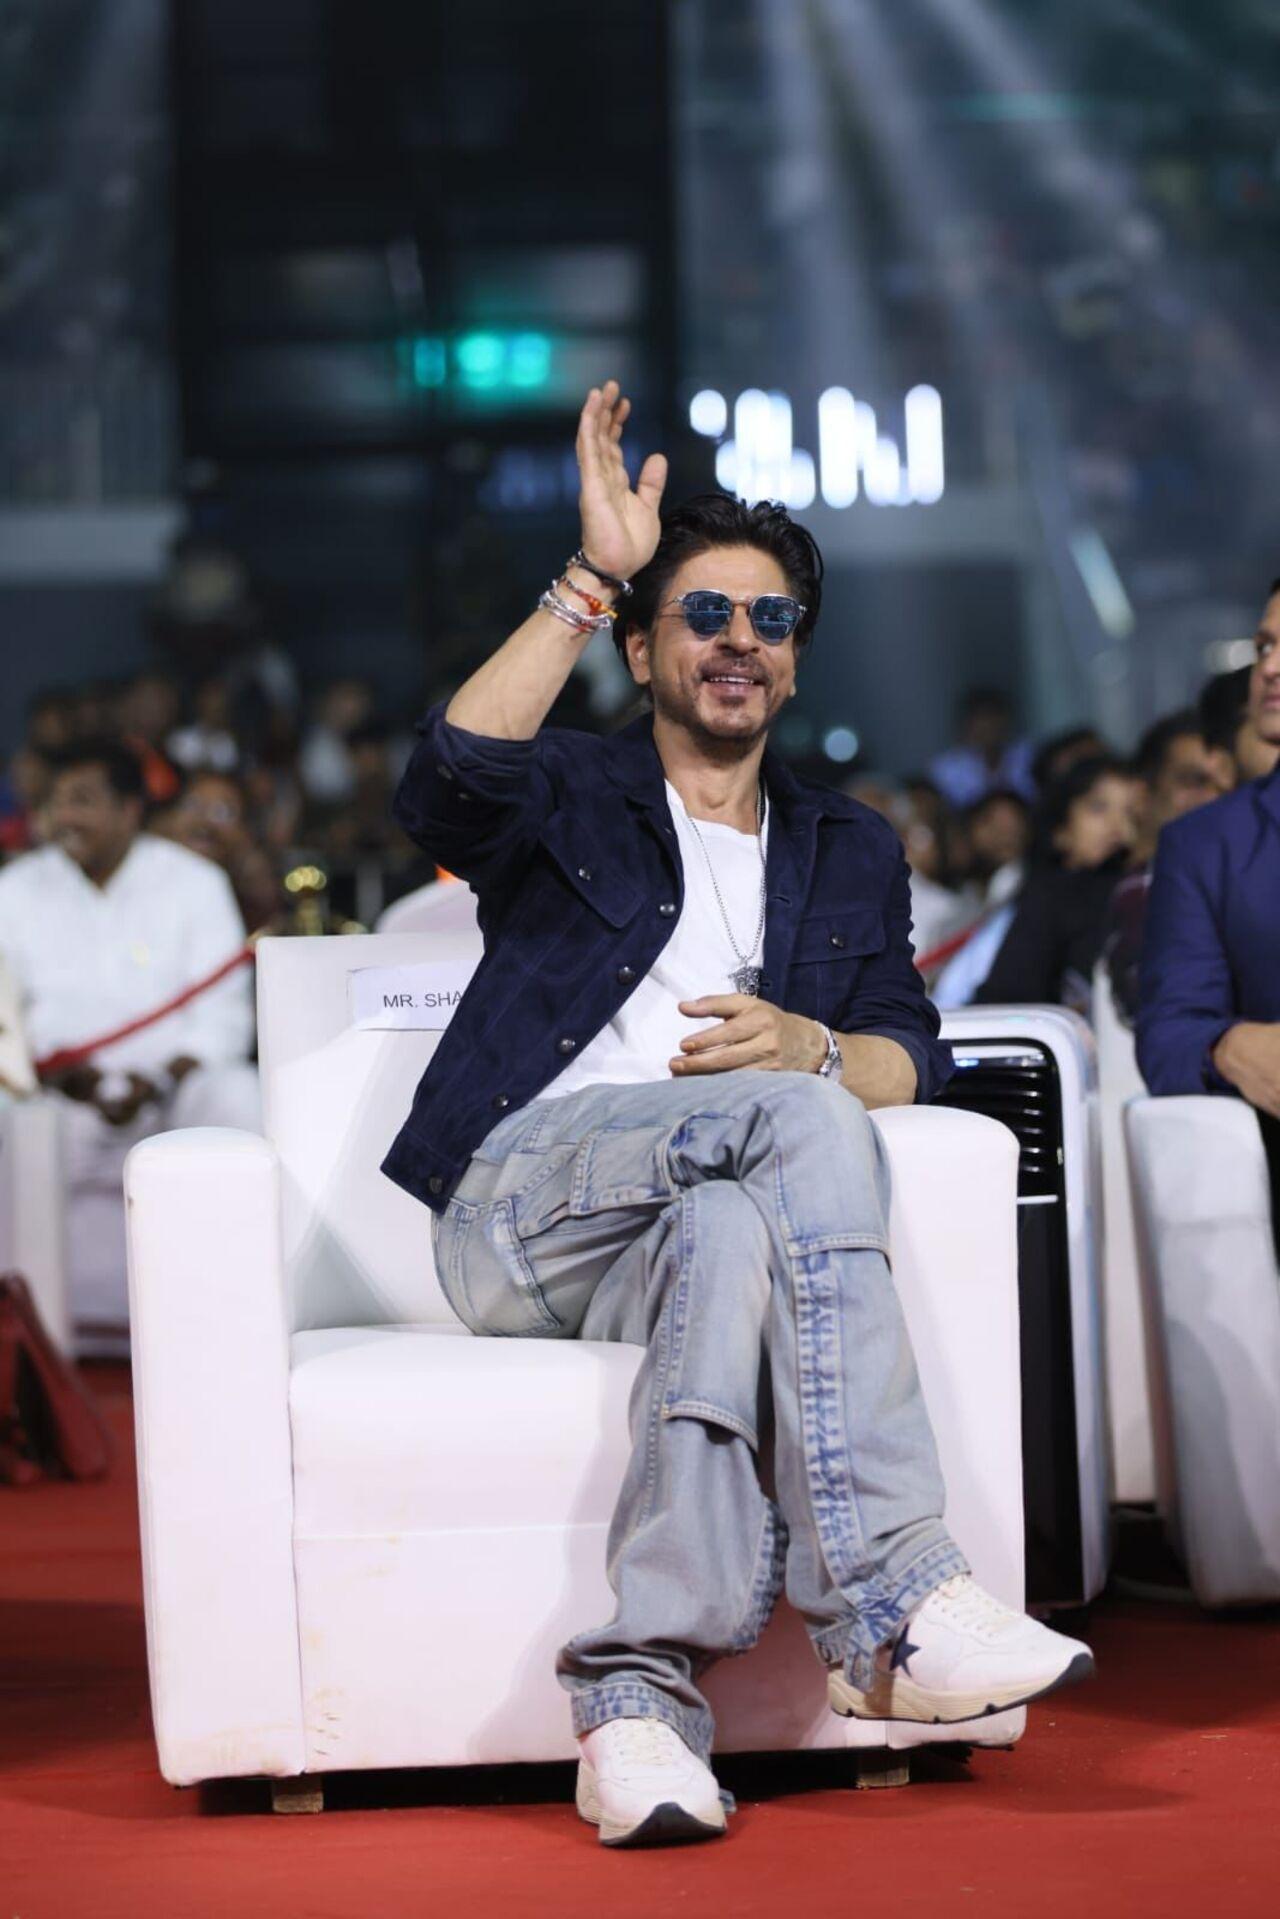 Shah Rukh Khan attended the pre-release event of Jawan in Chennai immediately after his visit to the Vaishnodevi shrine. He looked dapper in a white T-shirt and blue jacket